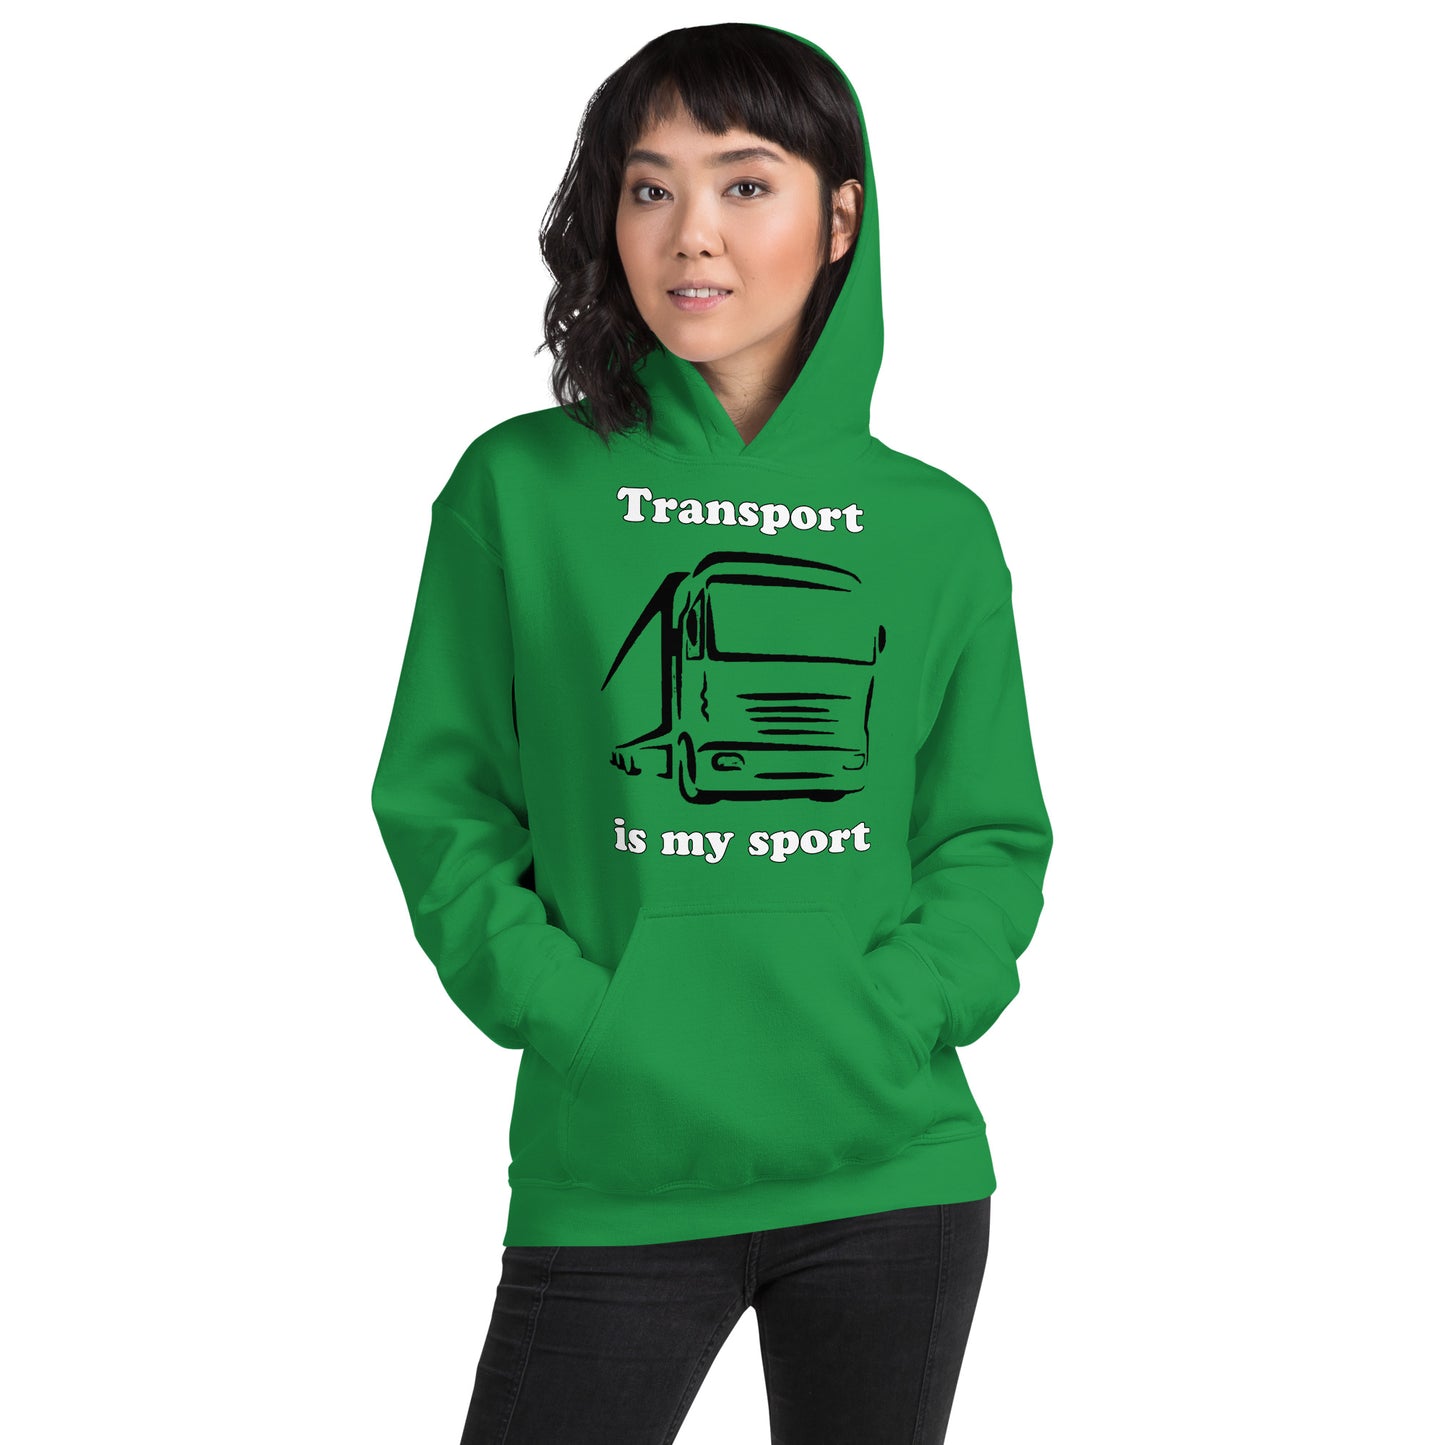 Woman with Irish green hoodie with picture of truck and text "Transport is my sport"